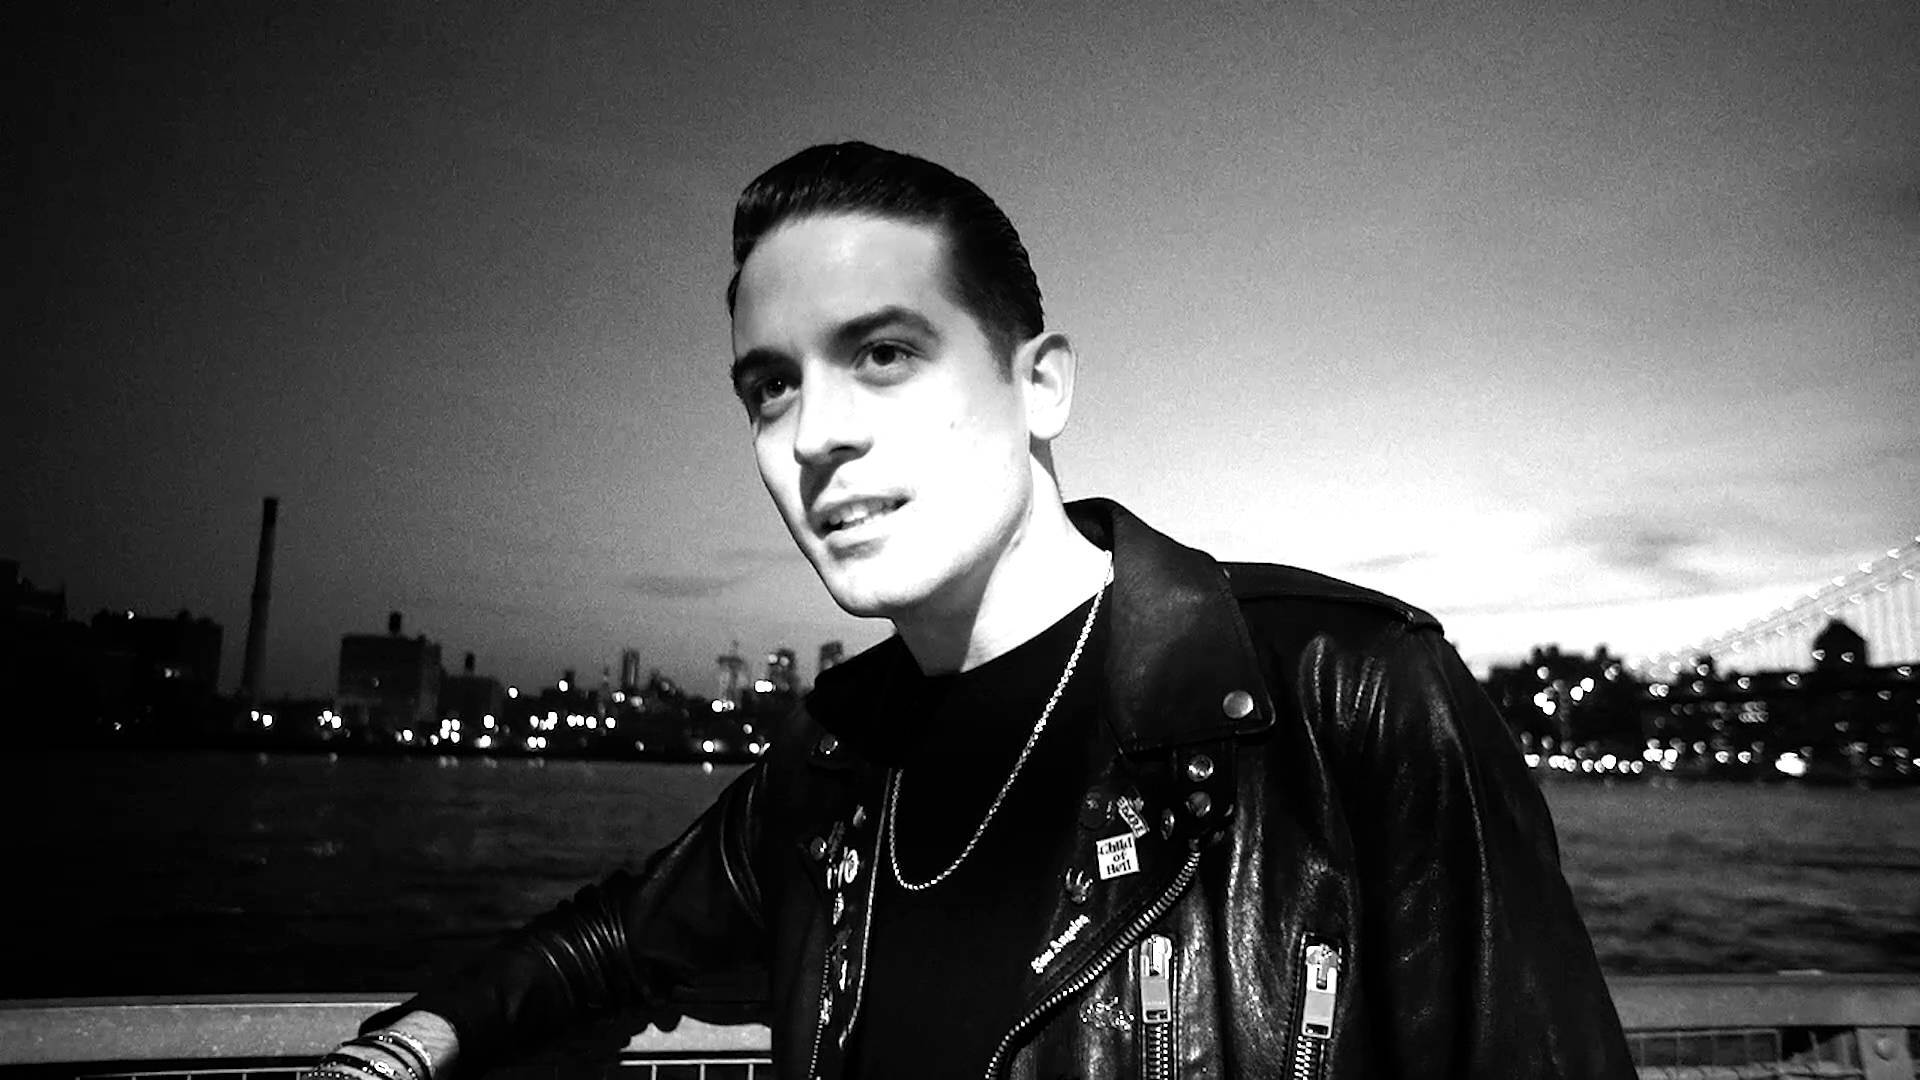 G Eazy Wallpaper Image Photo Picture Background